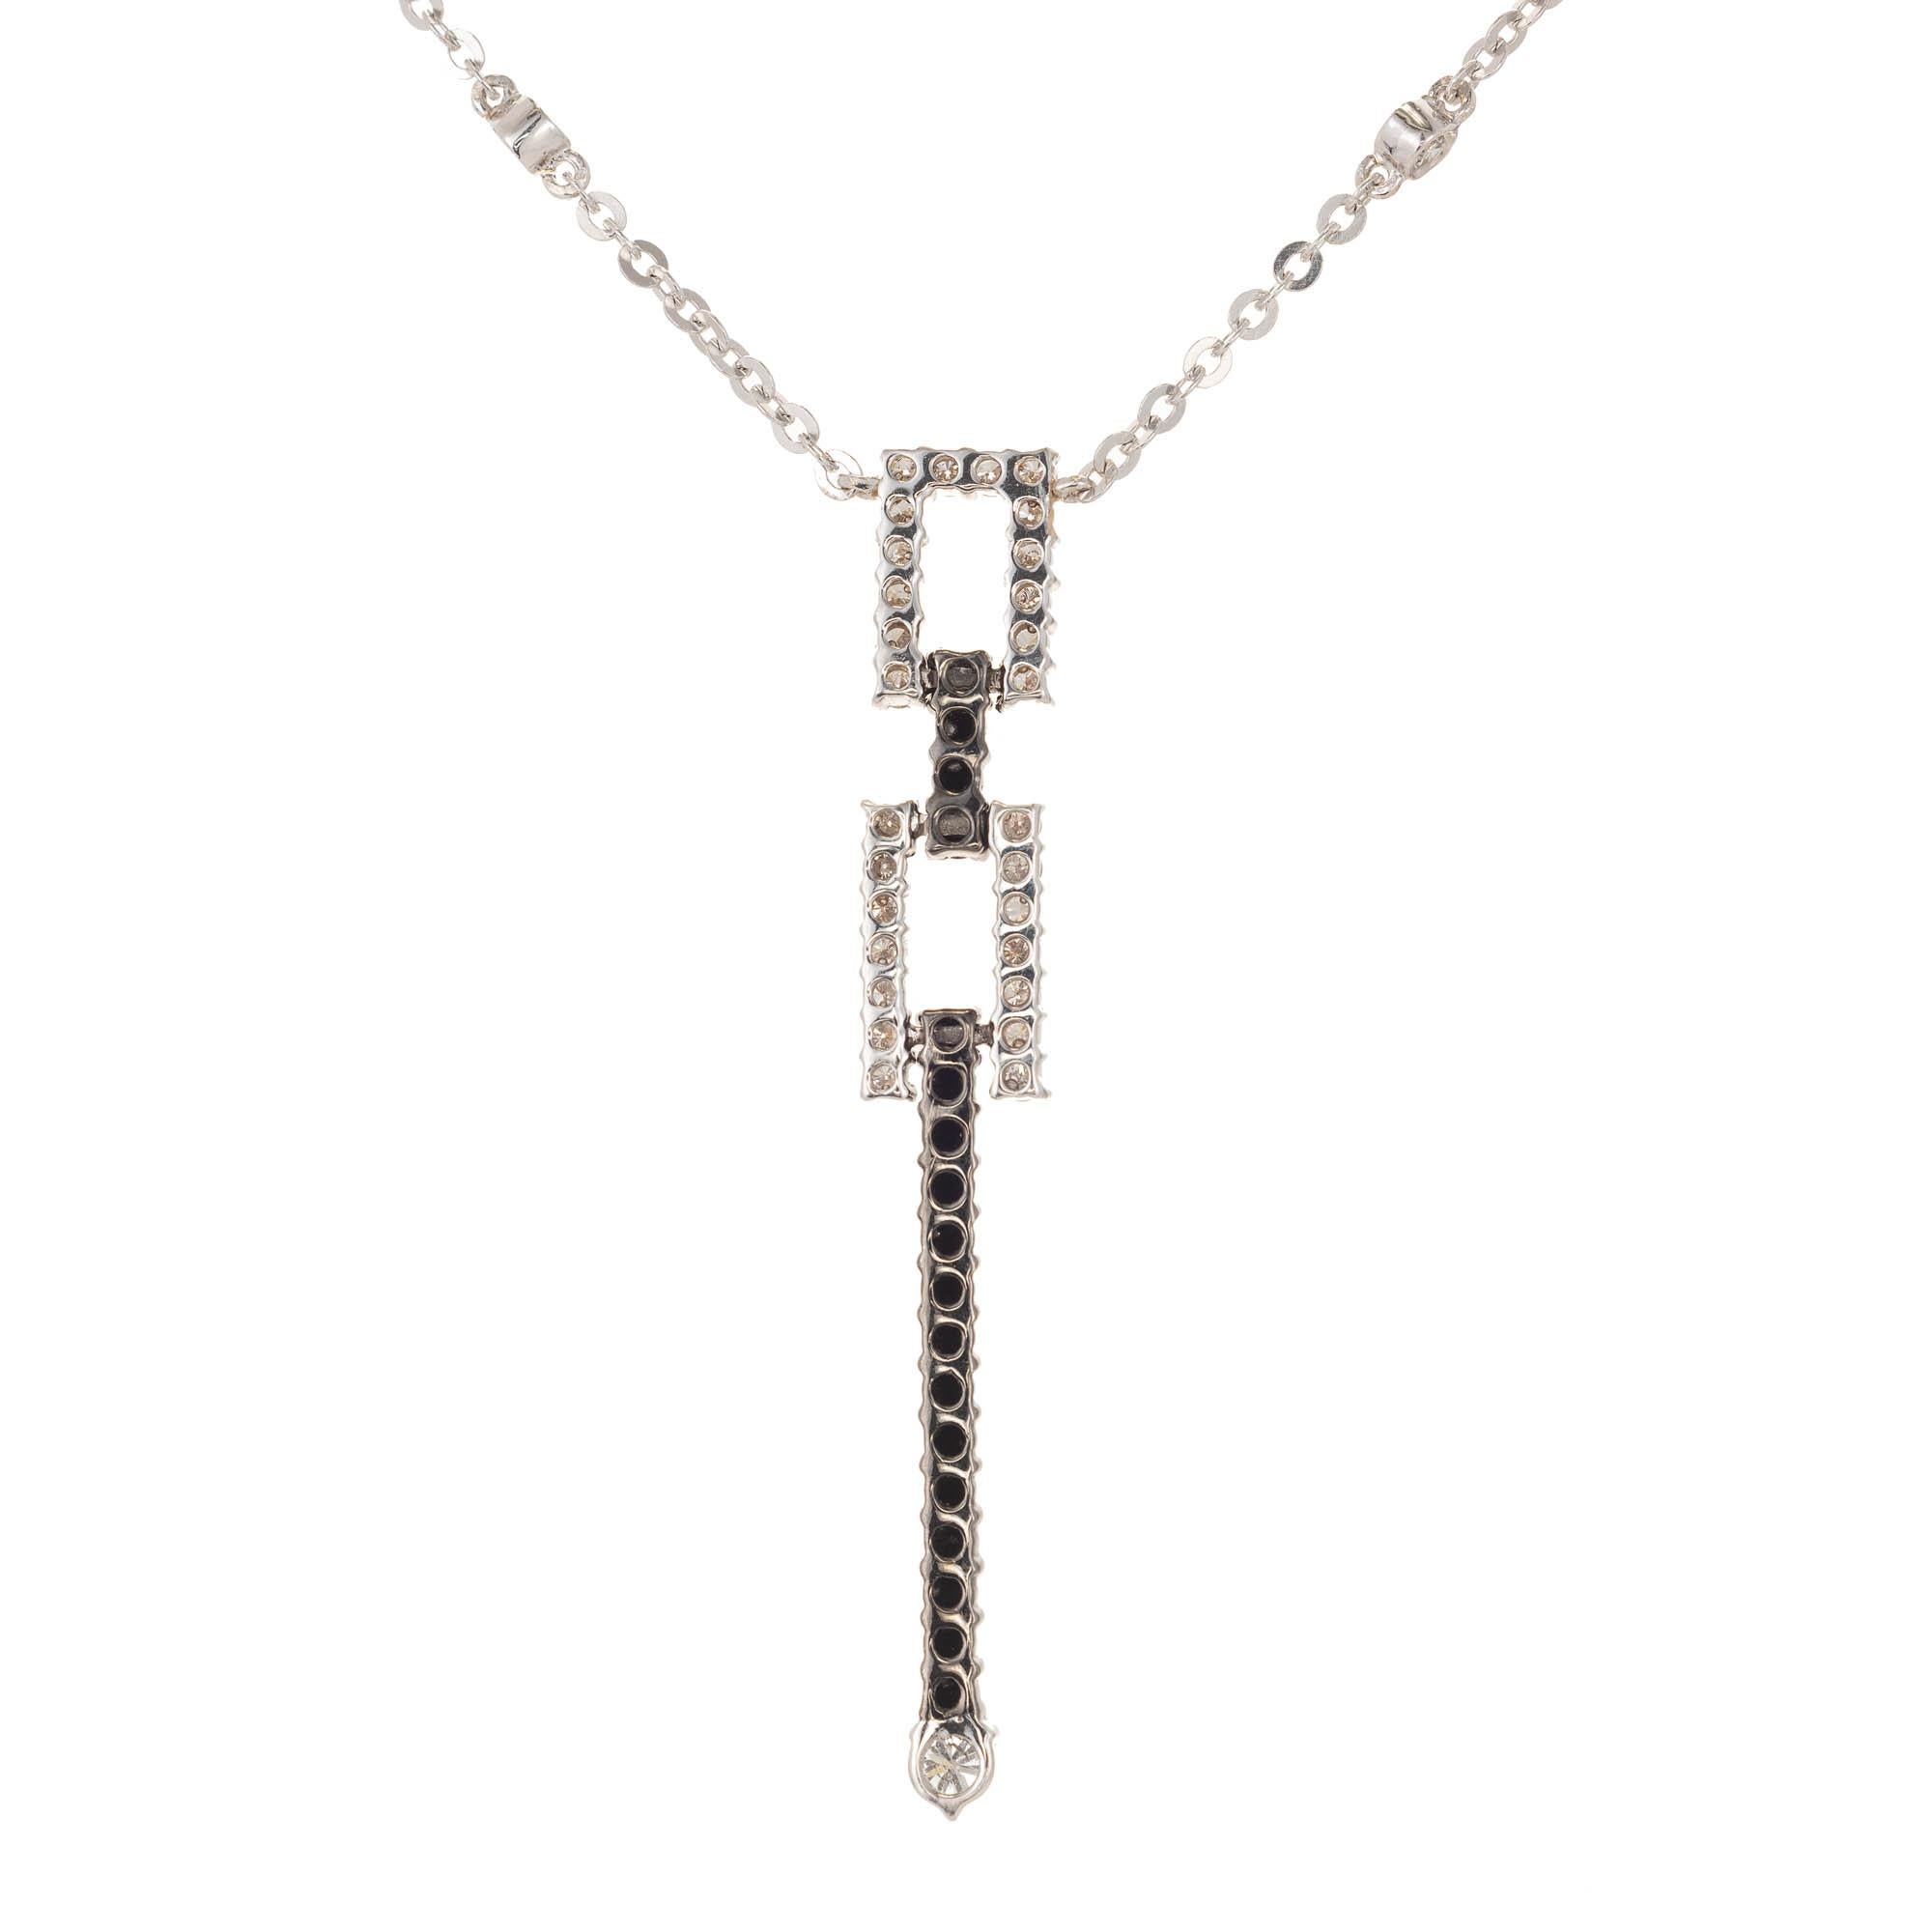 18k White gold black and white diamond pendant drop necklace. A 14k white gold flat link chain suspends a white and black diamond pendant at its center. Pendant of two rectangles set with white round diamonds connected by a vertical short row of